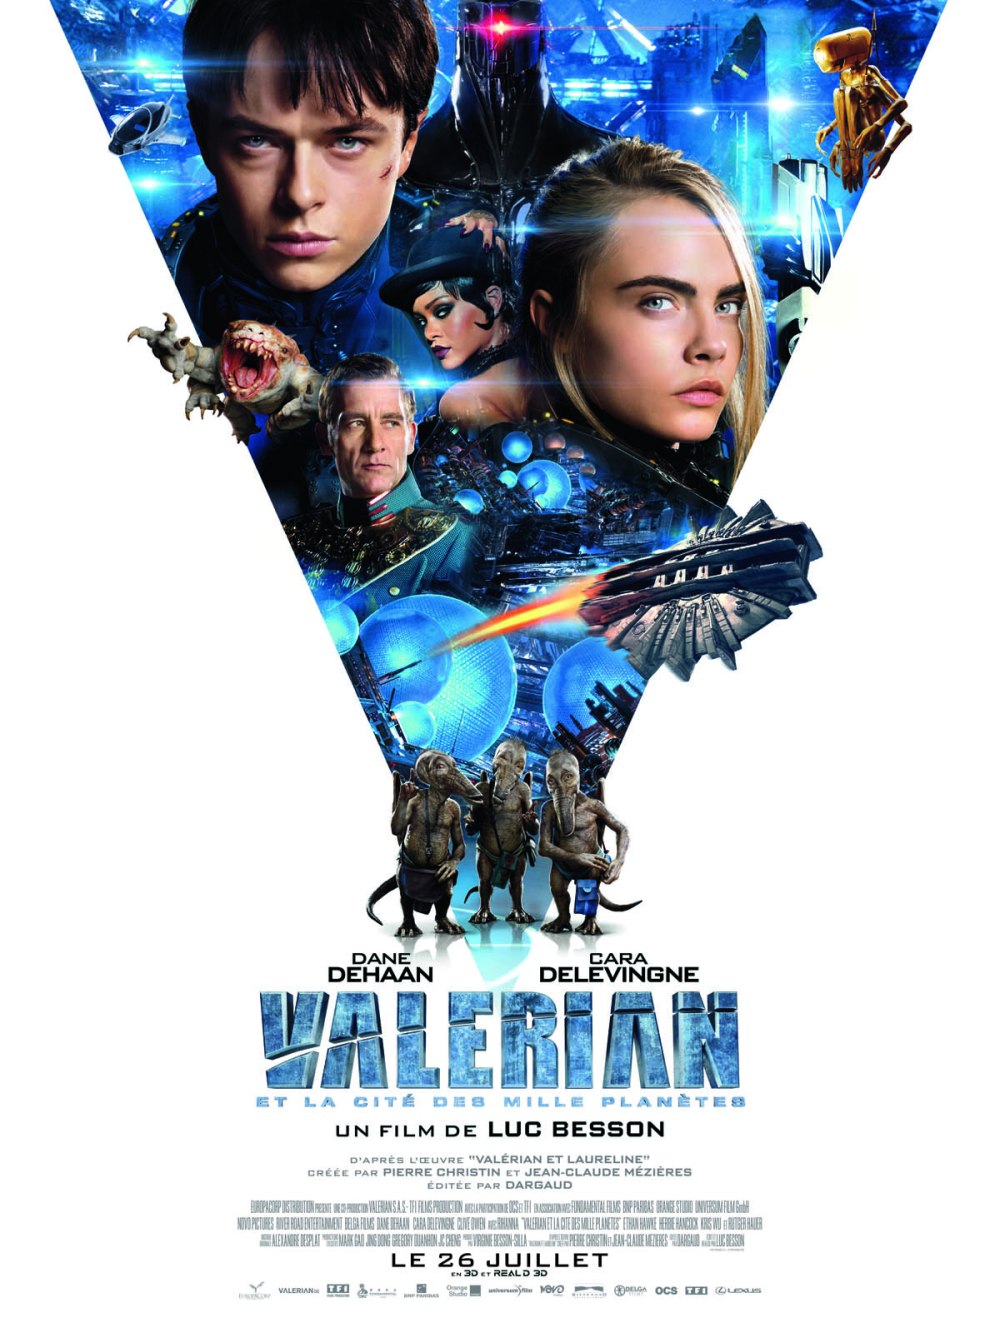 VALERIAN_Int'l Payoff France_120x160 @25%.indd